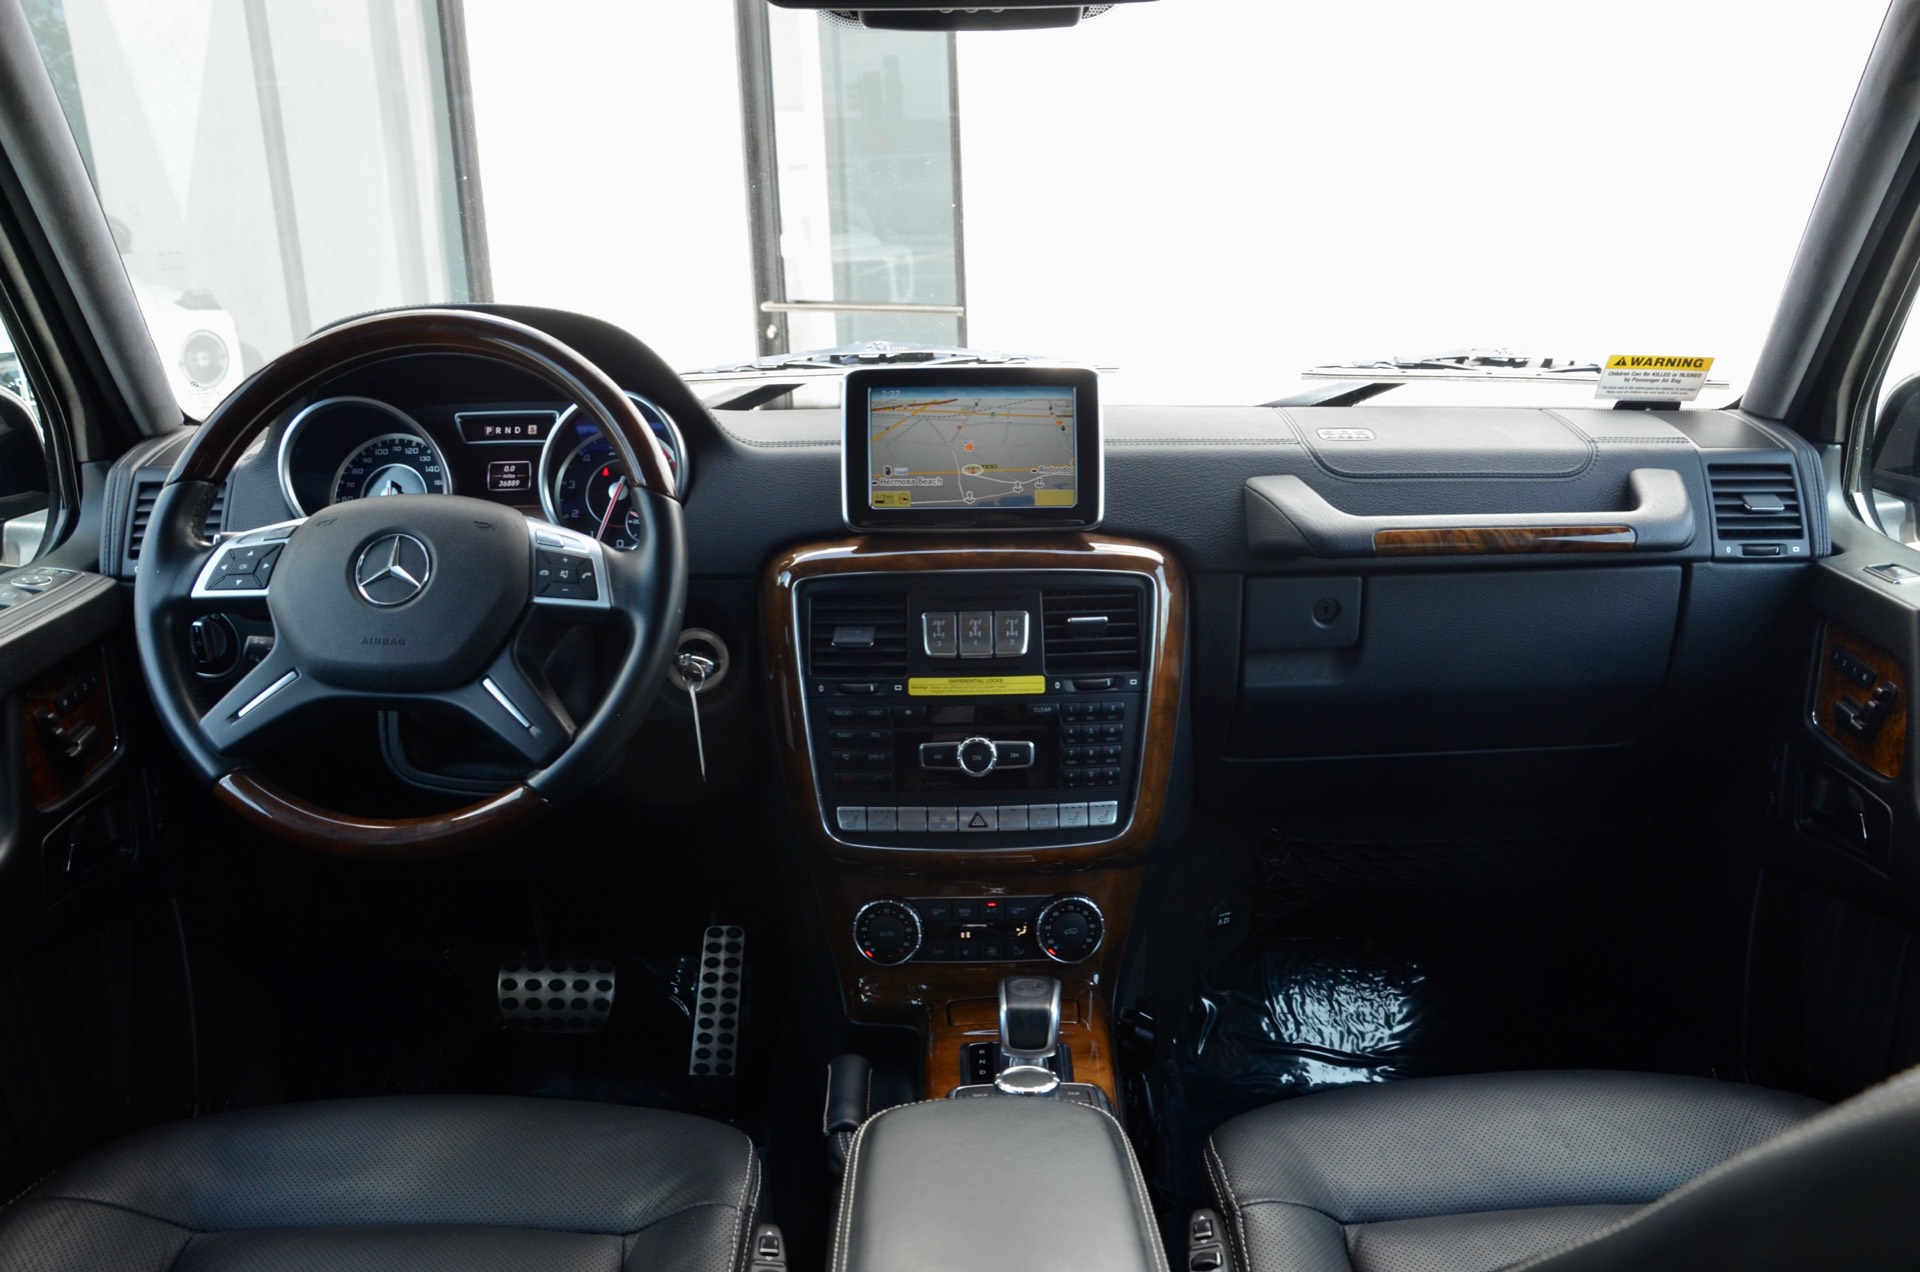 Used-2013-Mercedes-Benz-G-Class-G-63-AMG